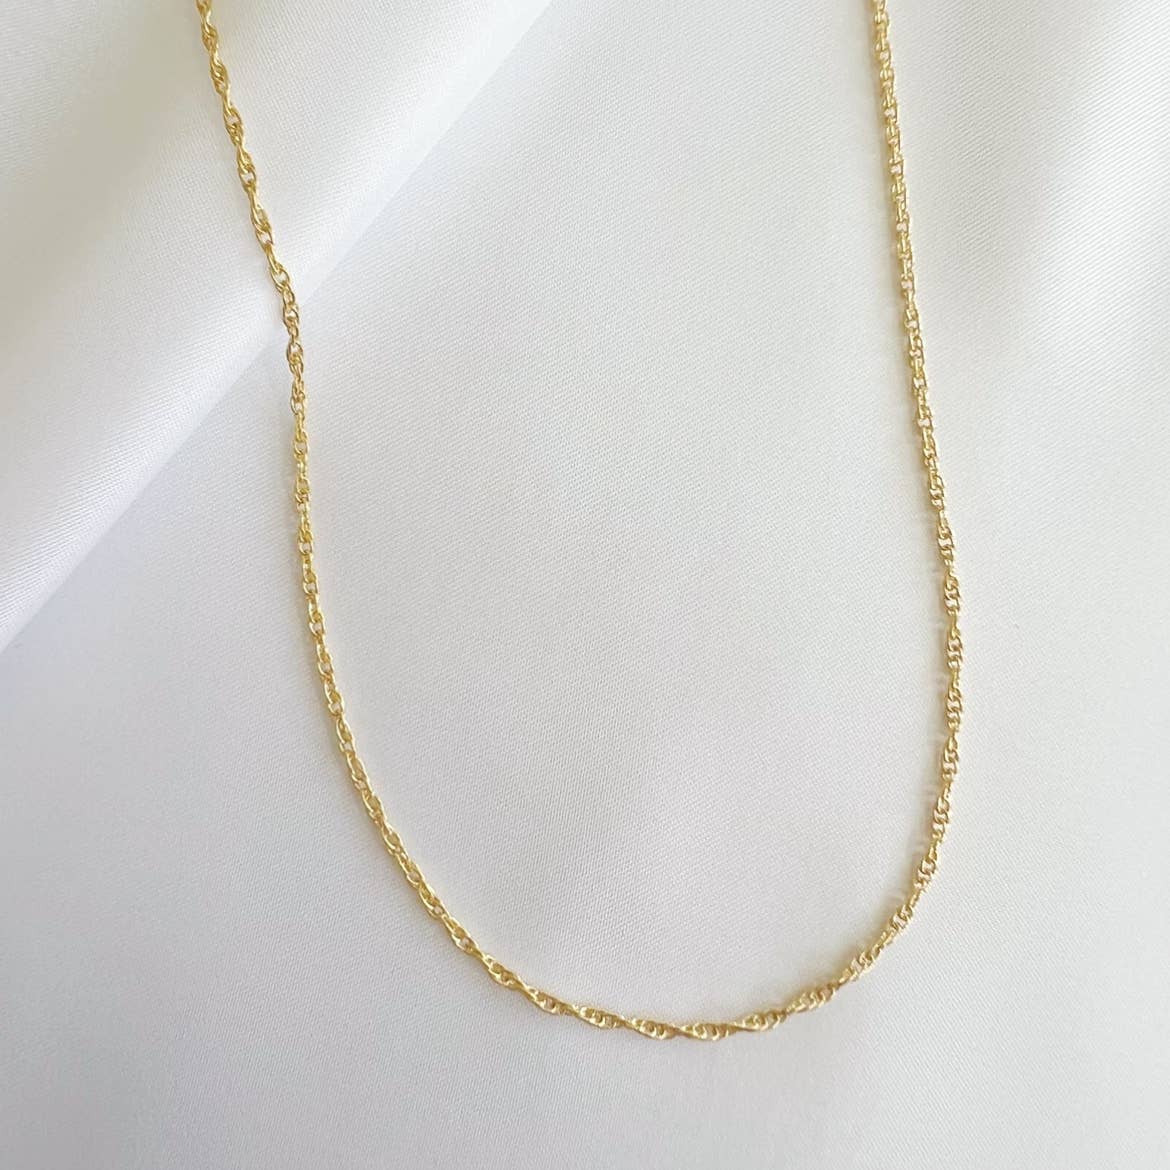 East Coast Rope Layering Chain Necklace Gold Filled: 16”